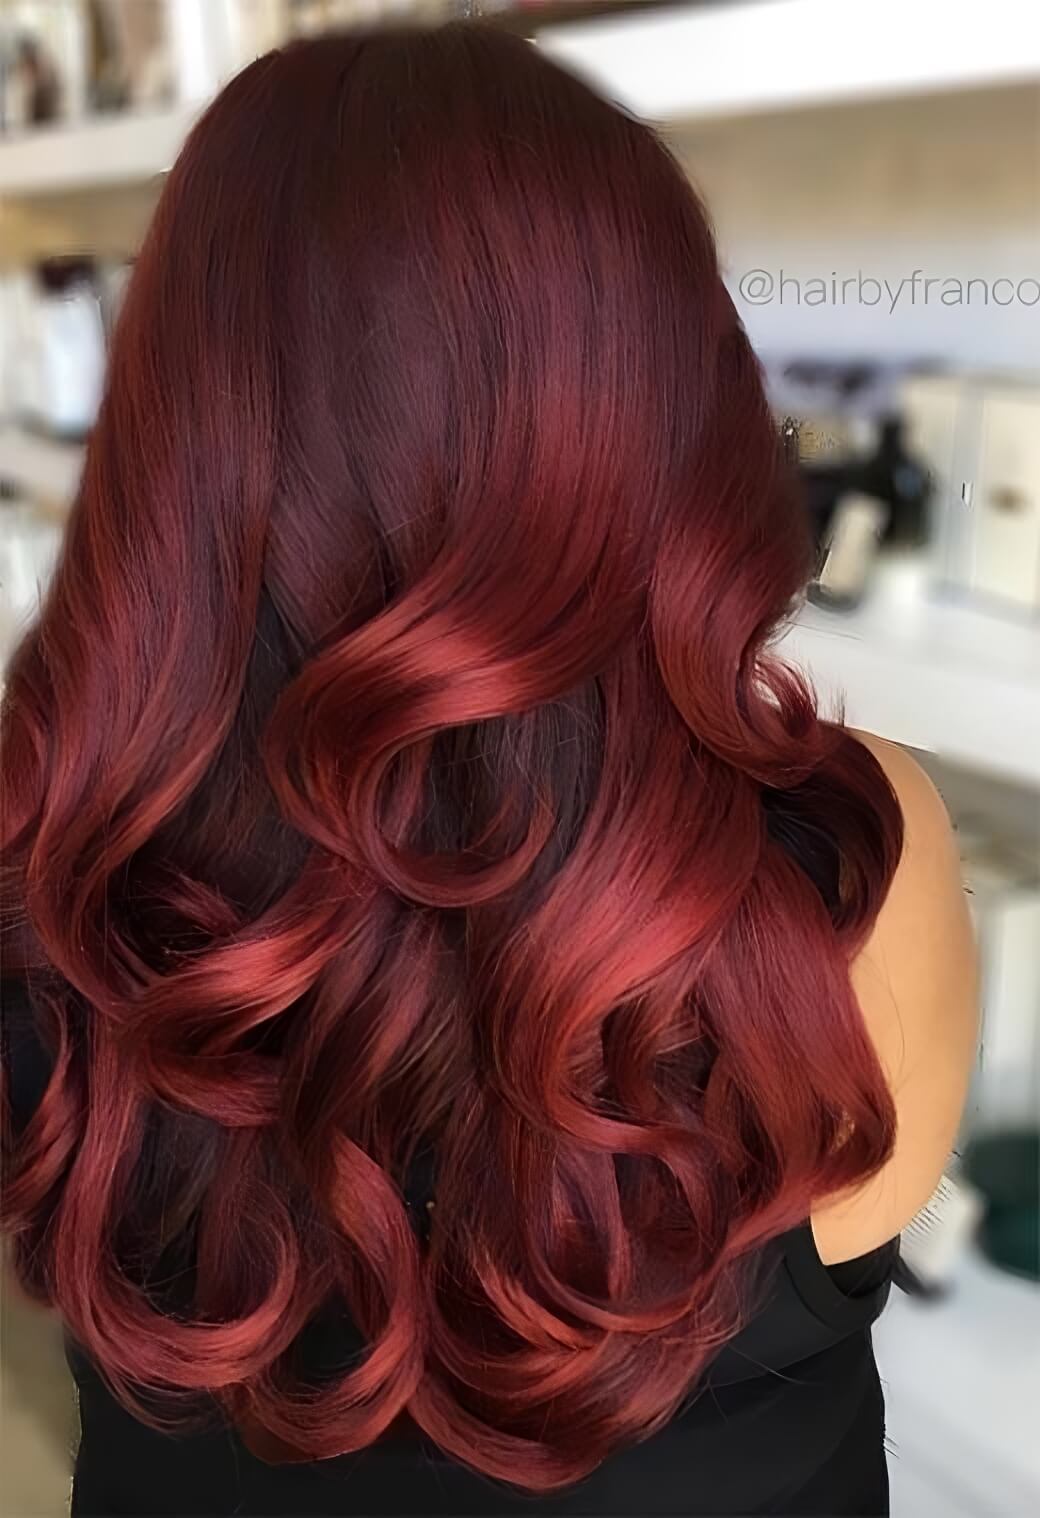 Burgundy Hair Color With Bronzed Ends